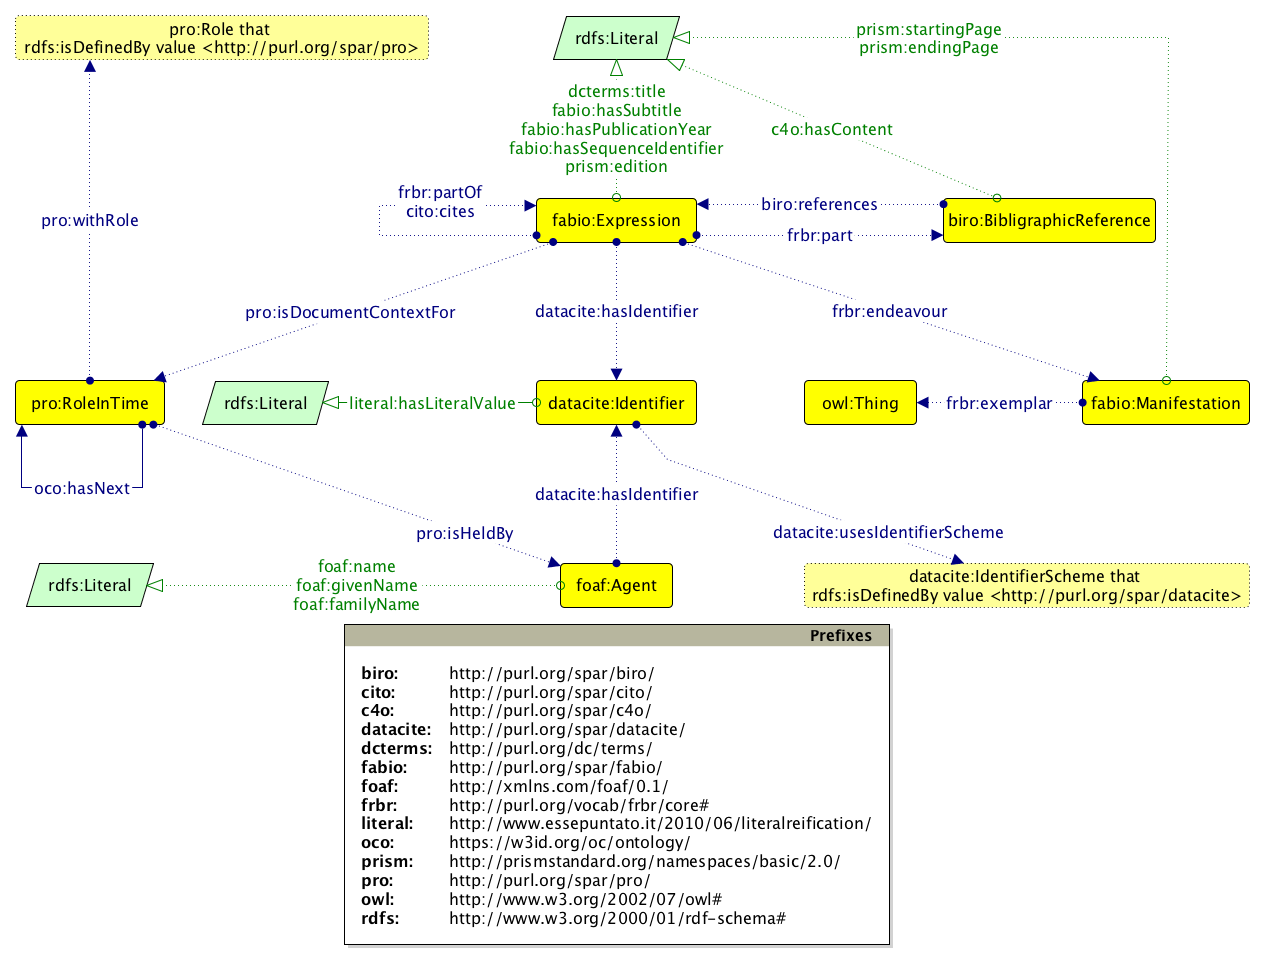 The Graffoo diagram [14] of the main ontological entities described by the OCC metadata model